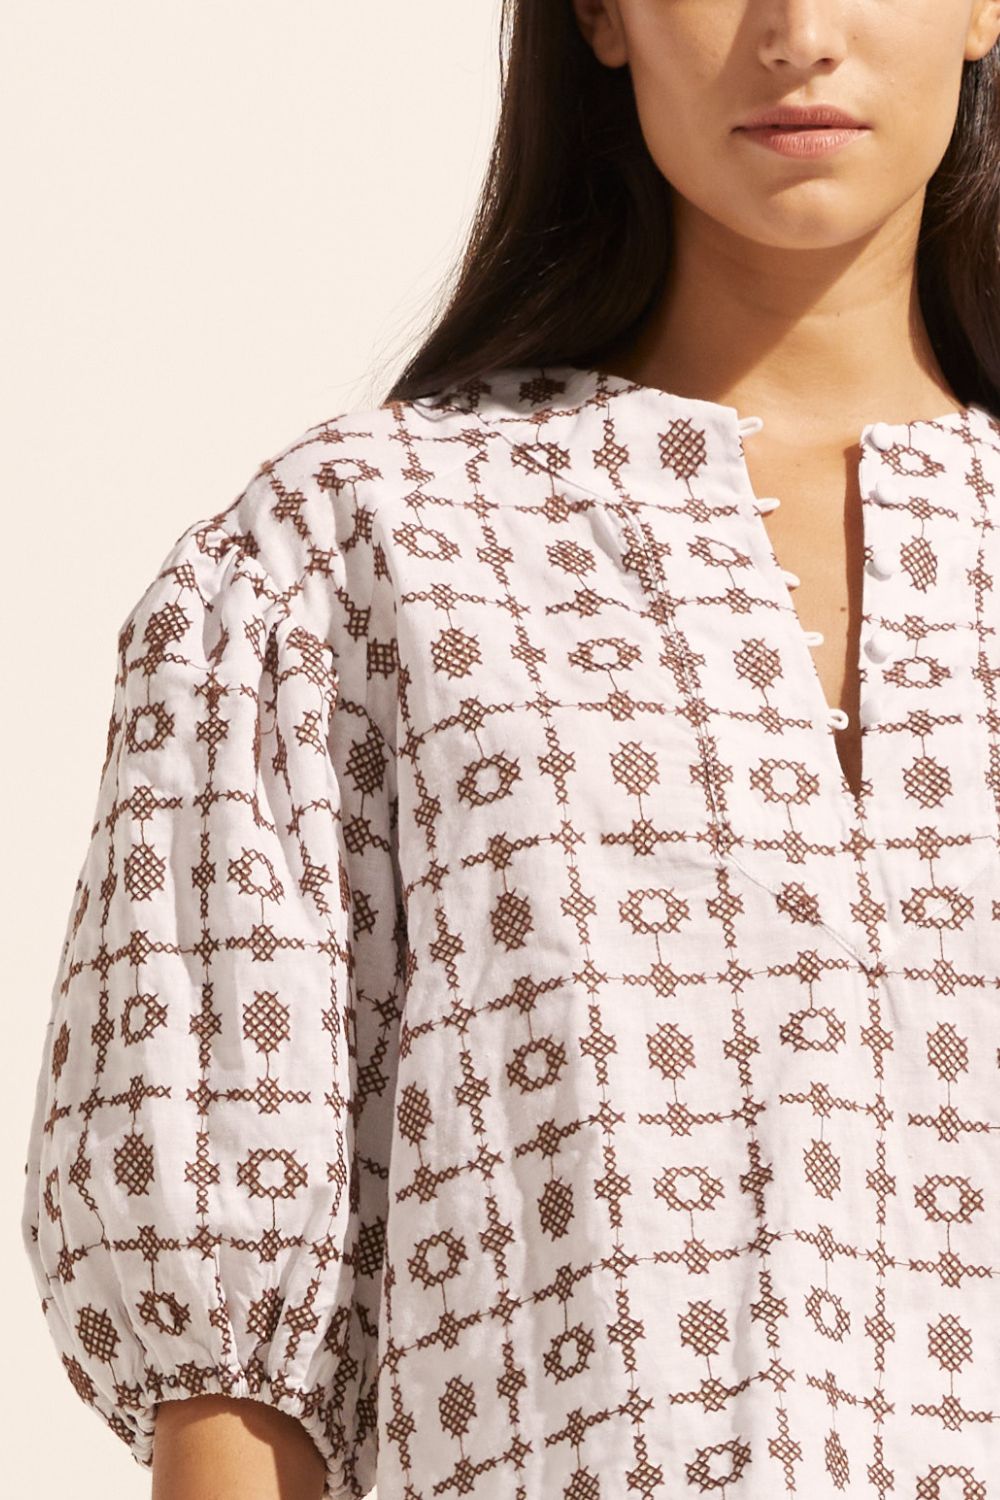 brown and white, top, mid length sleeve, button down neckline, embroidered, close up image